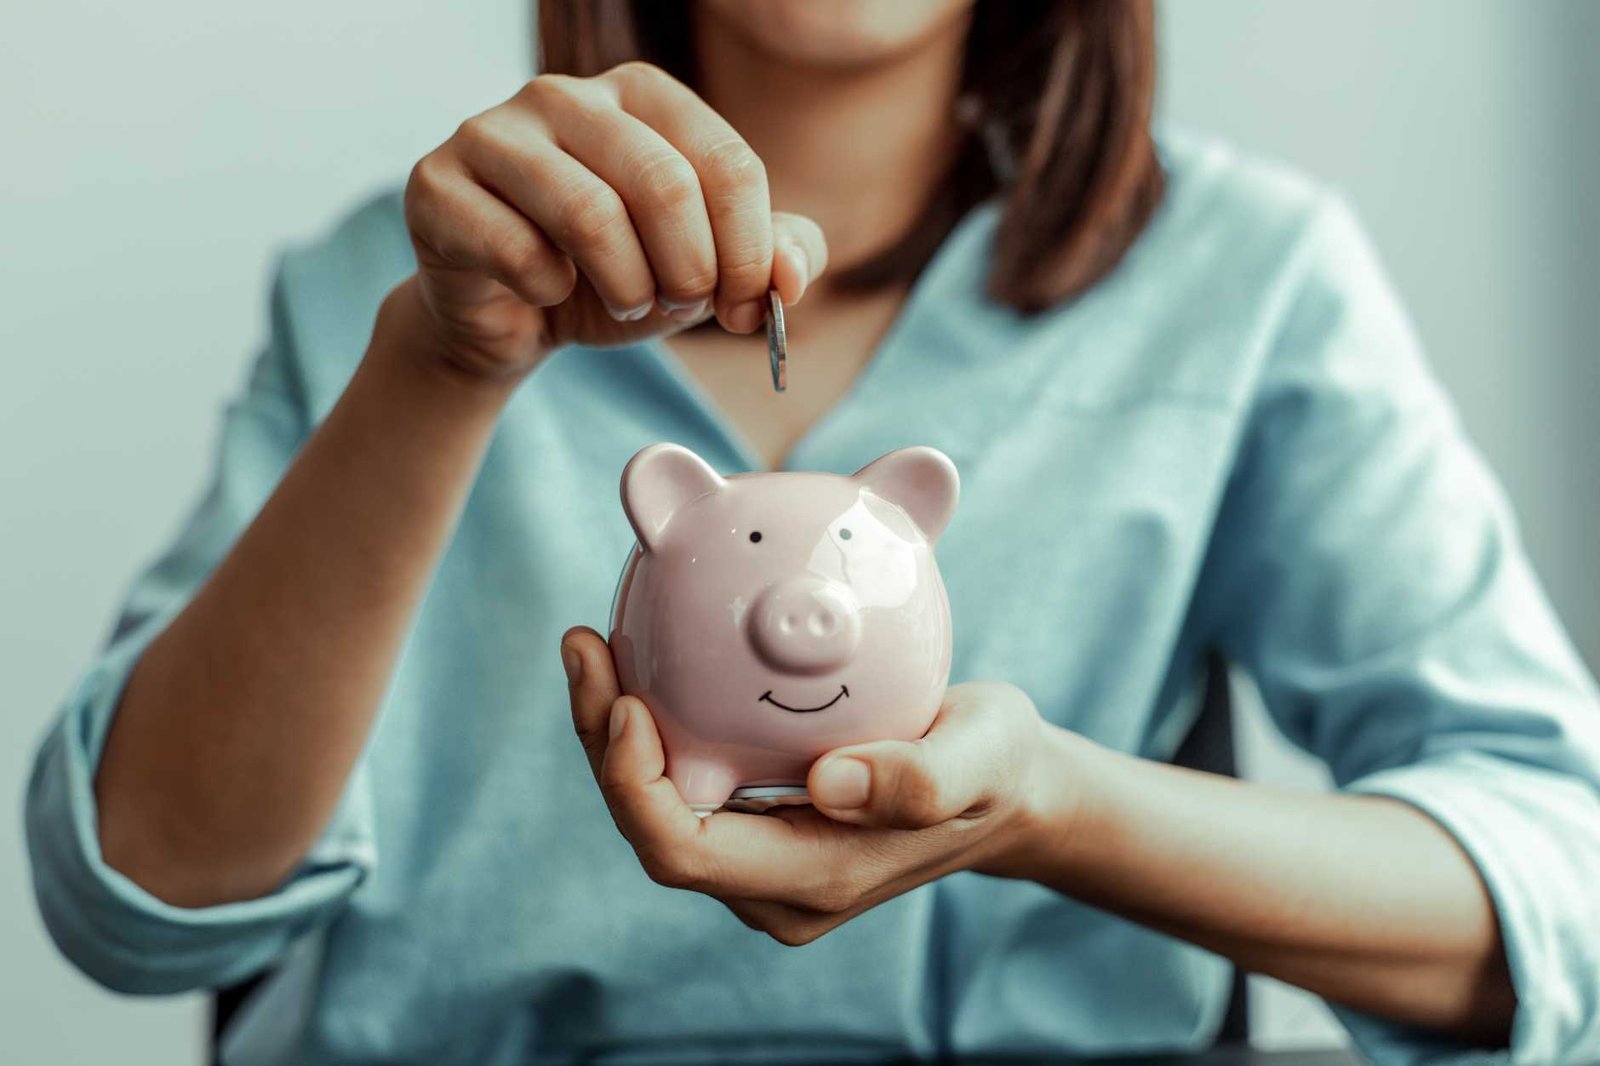 The importance of teaching children about saving and money management